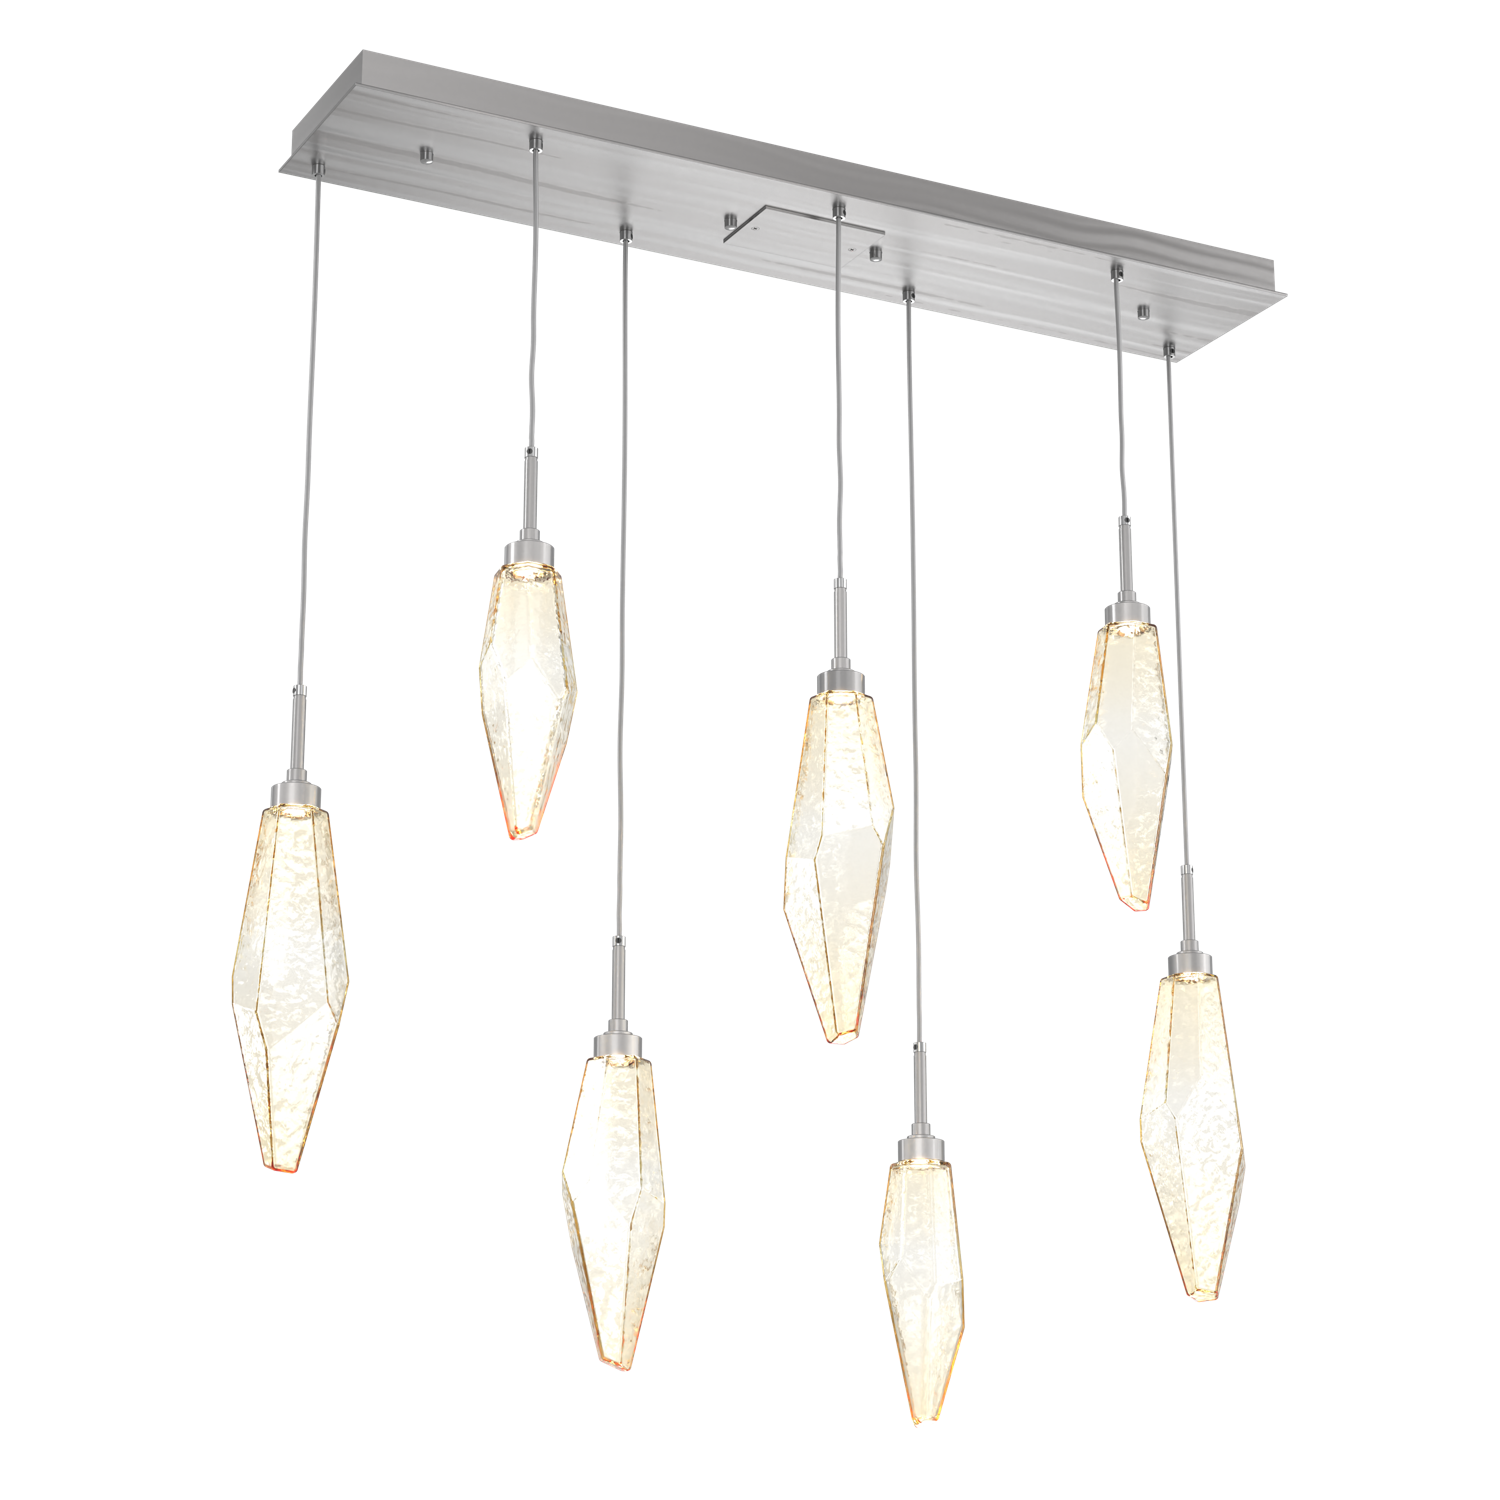 PLB0050-07-SN-CA-Hammerton-Studio-Rock-Crystal-7-light-linear-pendant-chandelier-with-satin-nickel-finish-and-chilled-amber-blown-glass-shades-and-LED-lamping